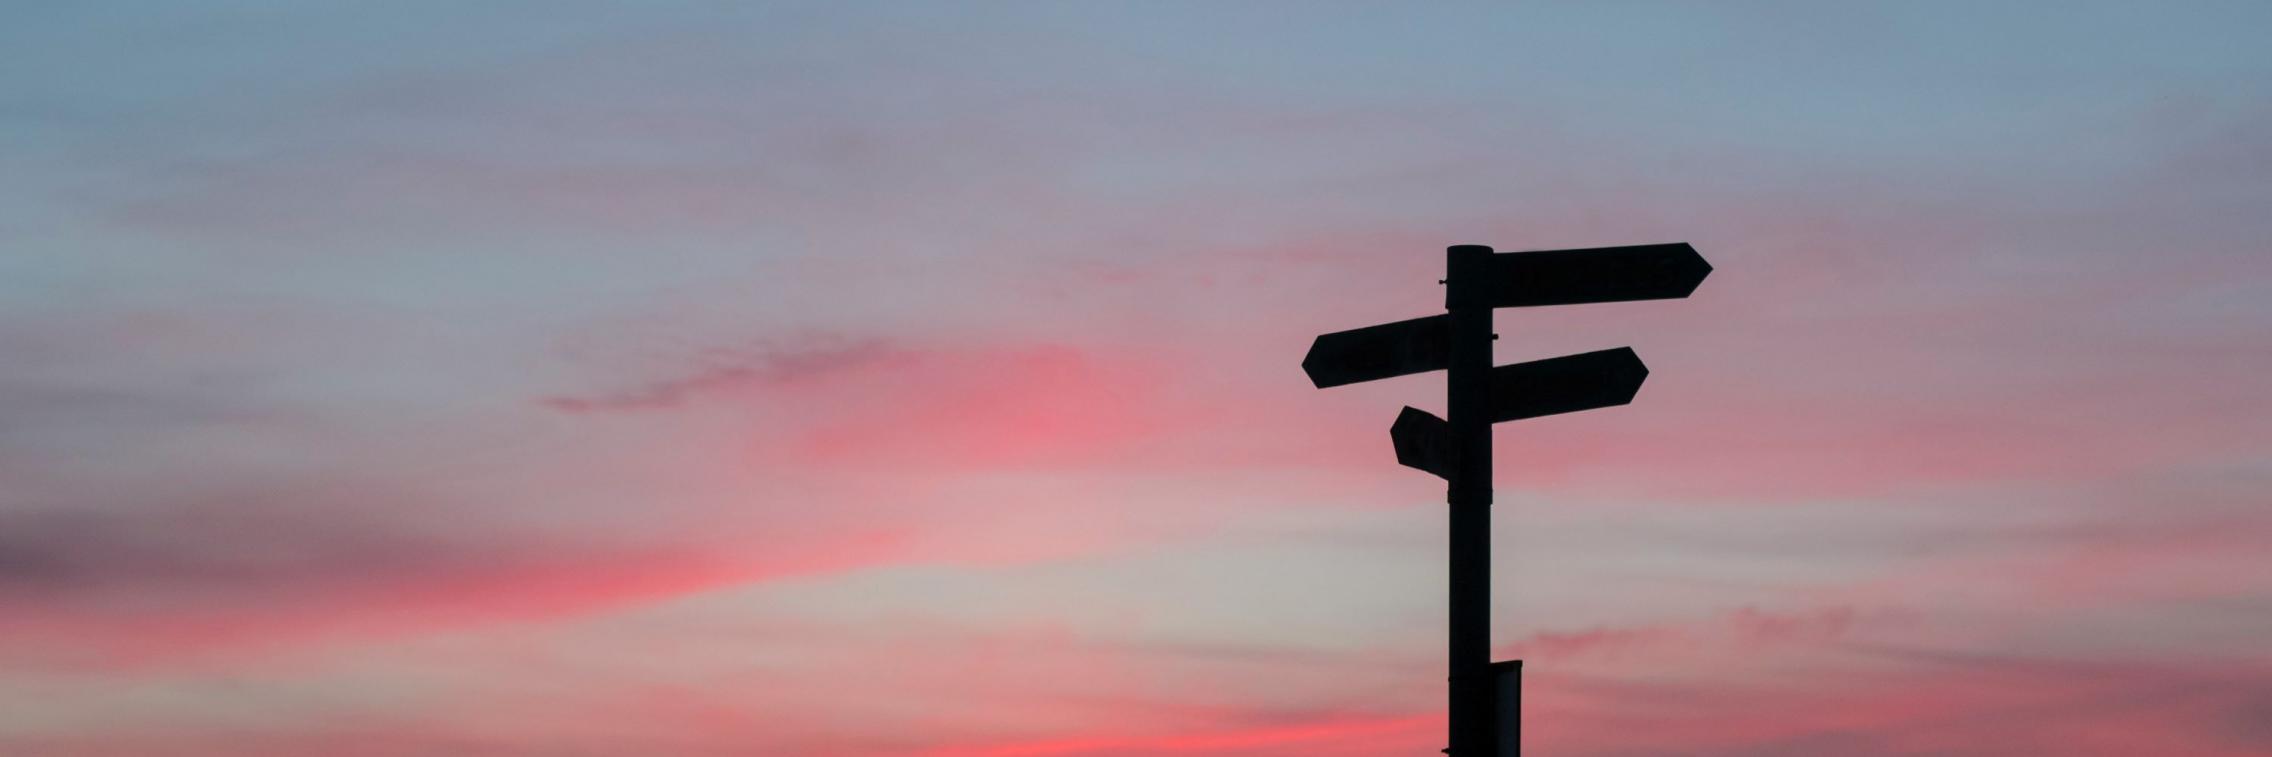 A silhouette of a street sign with arrows pointing in multiple directions at sunset.